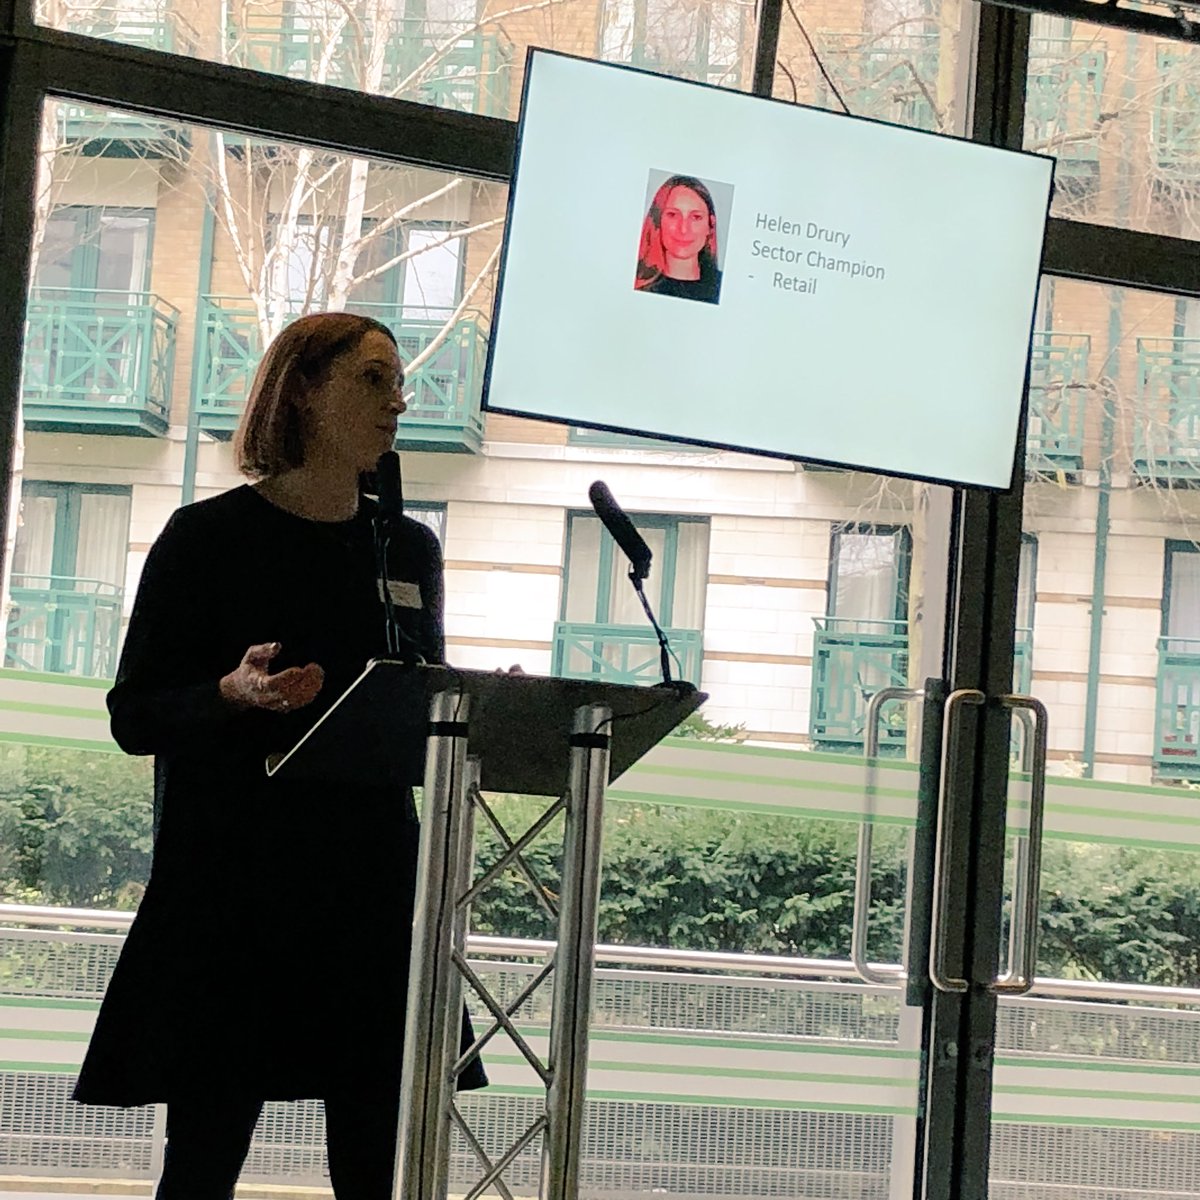 Retail Sector Champion - Helen Drury @intu - talking about the @RevoLatest Accessible Places Toolkit. Our signposting document to help those in our sector raise awareness, skills & physical changes to make places more inclusive. #DisSecChamps #retail #property #community